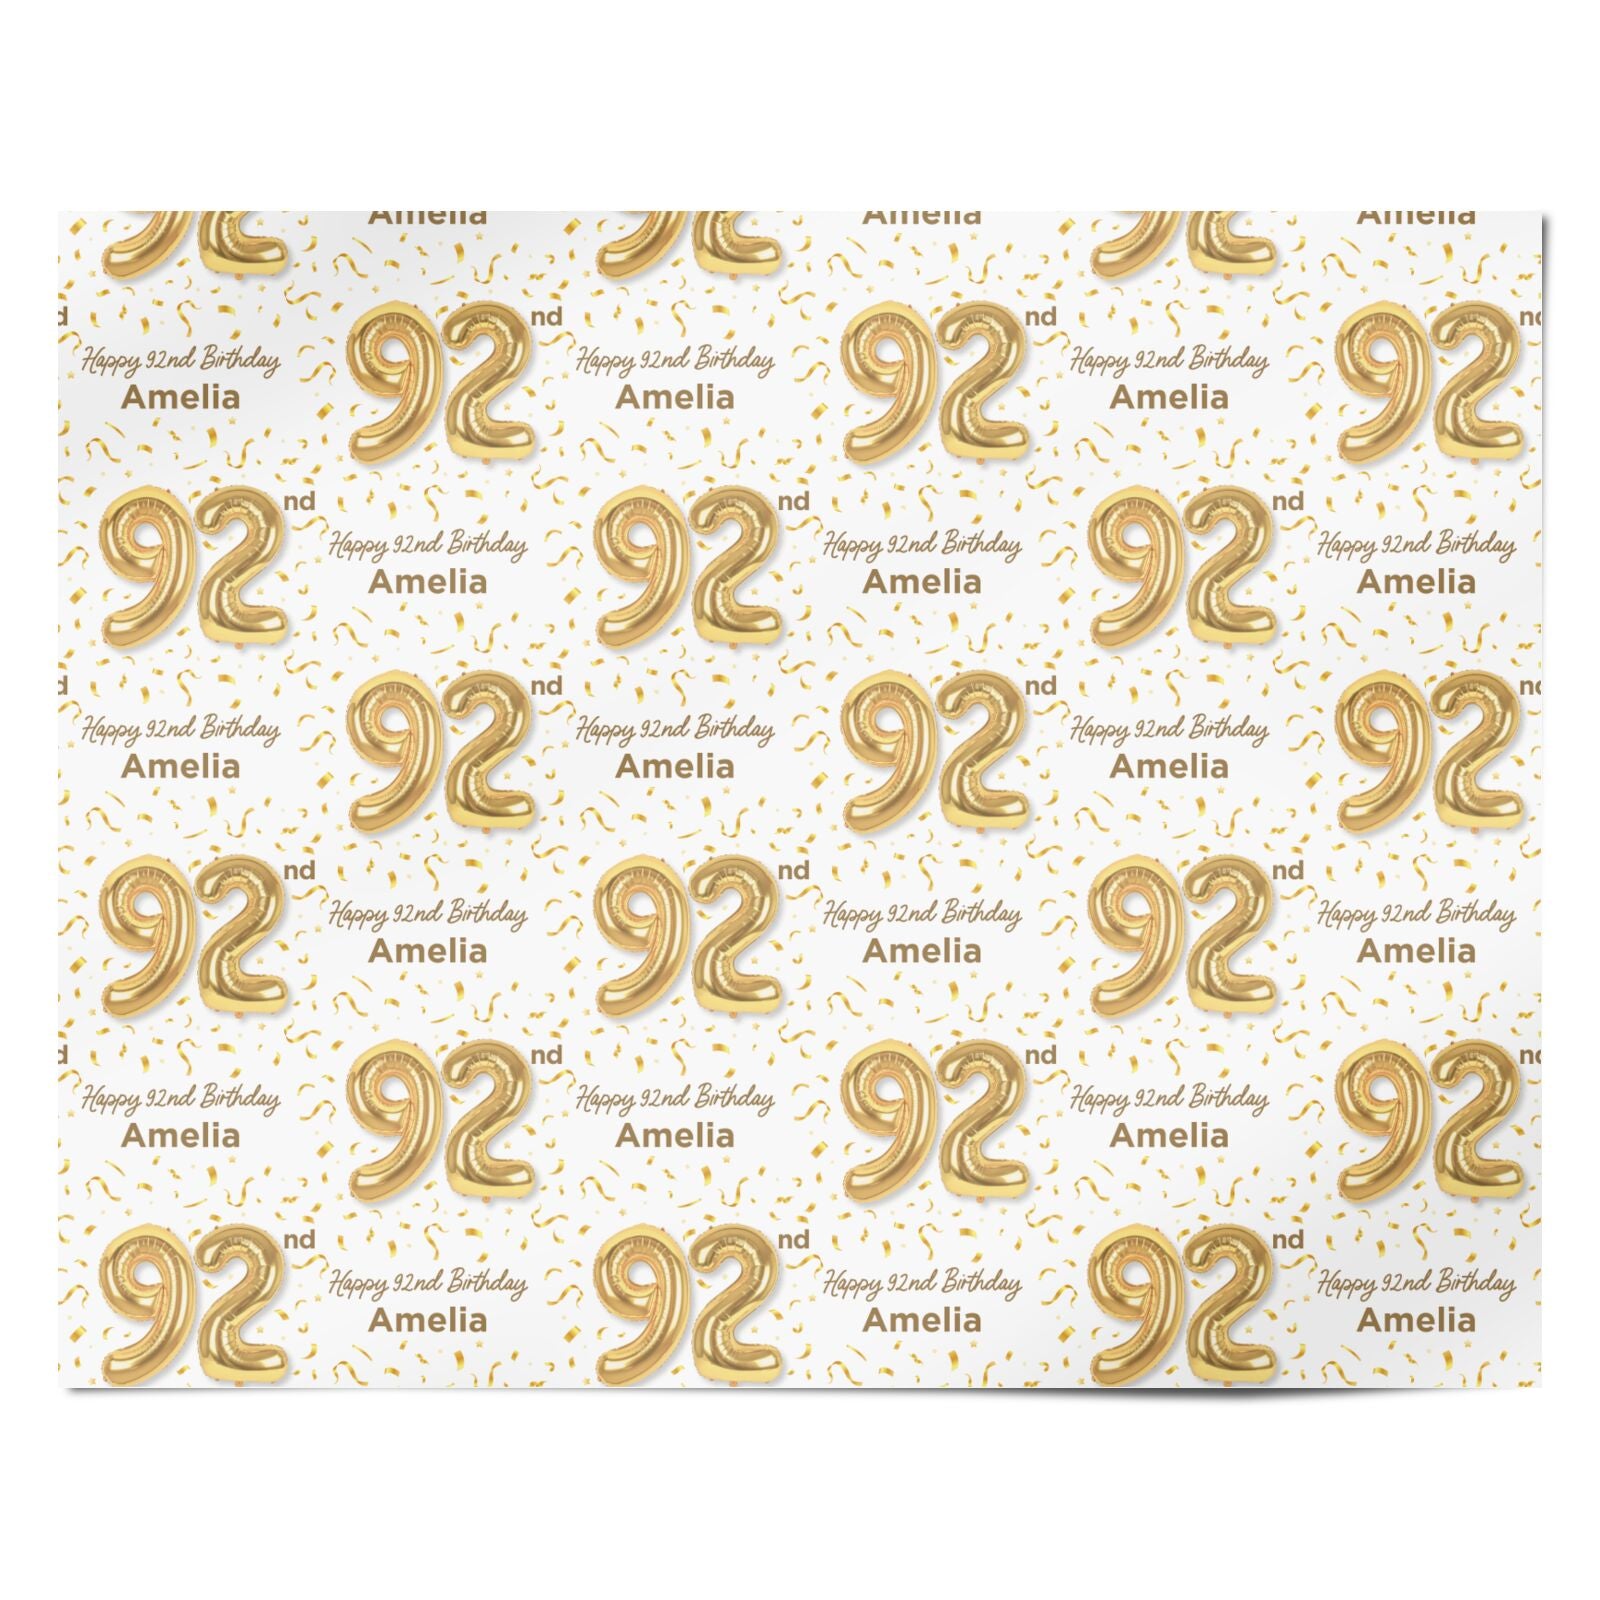 Personalised 92nd Birthday Personalised Wrapping Paper Alternative